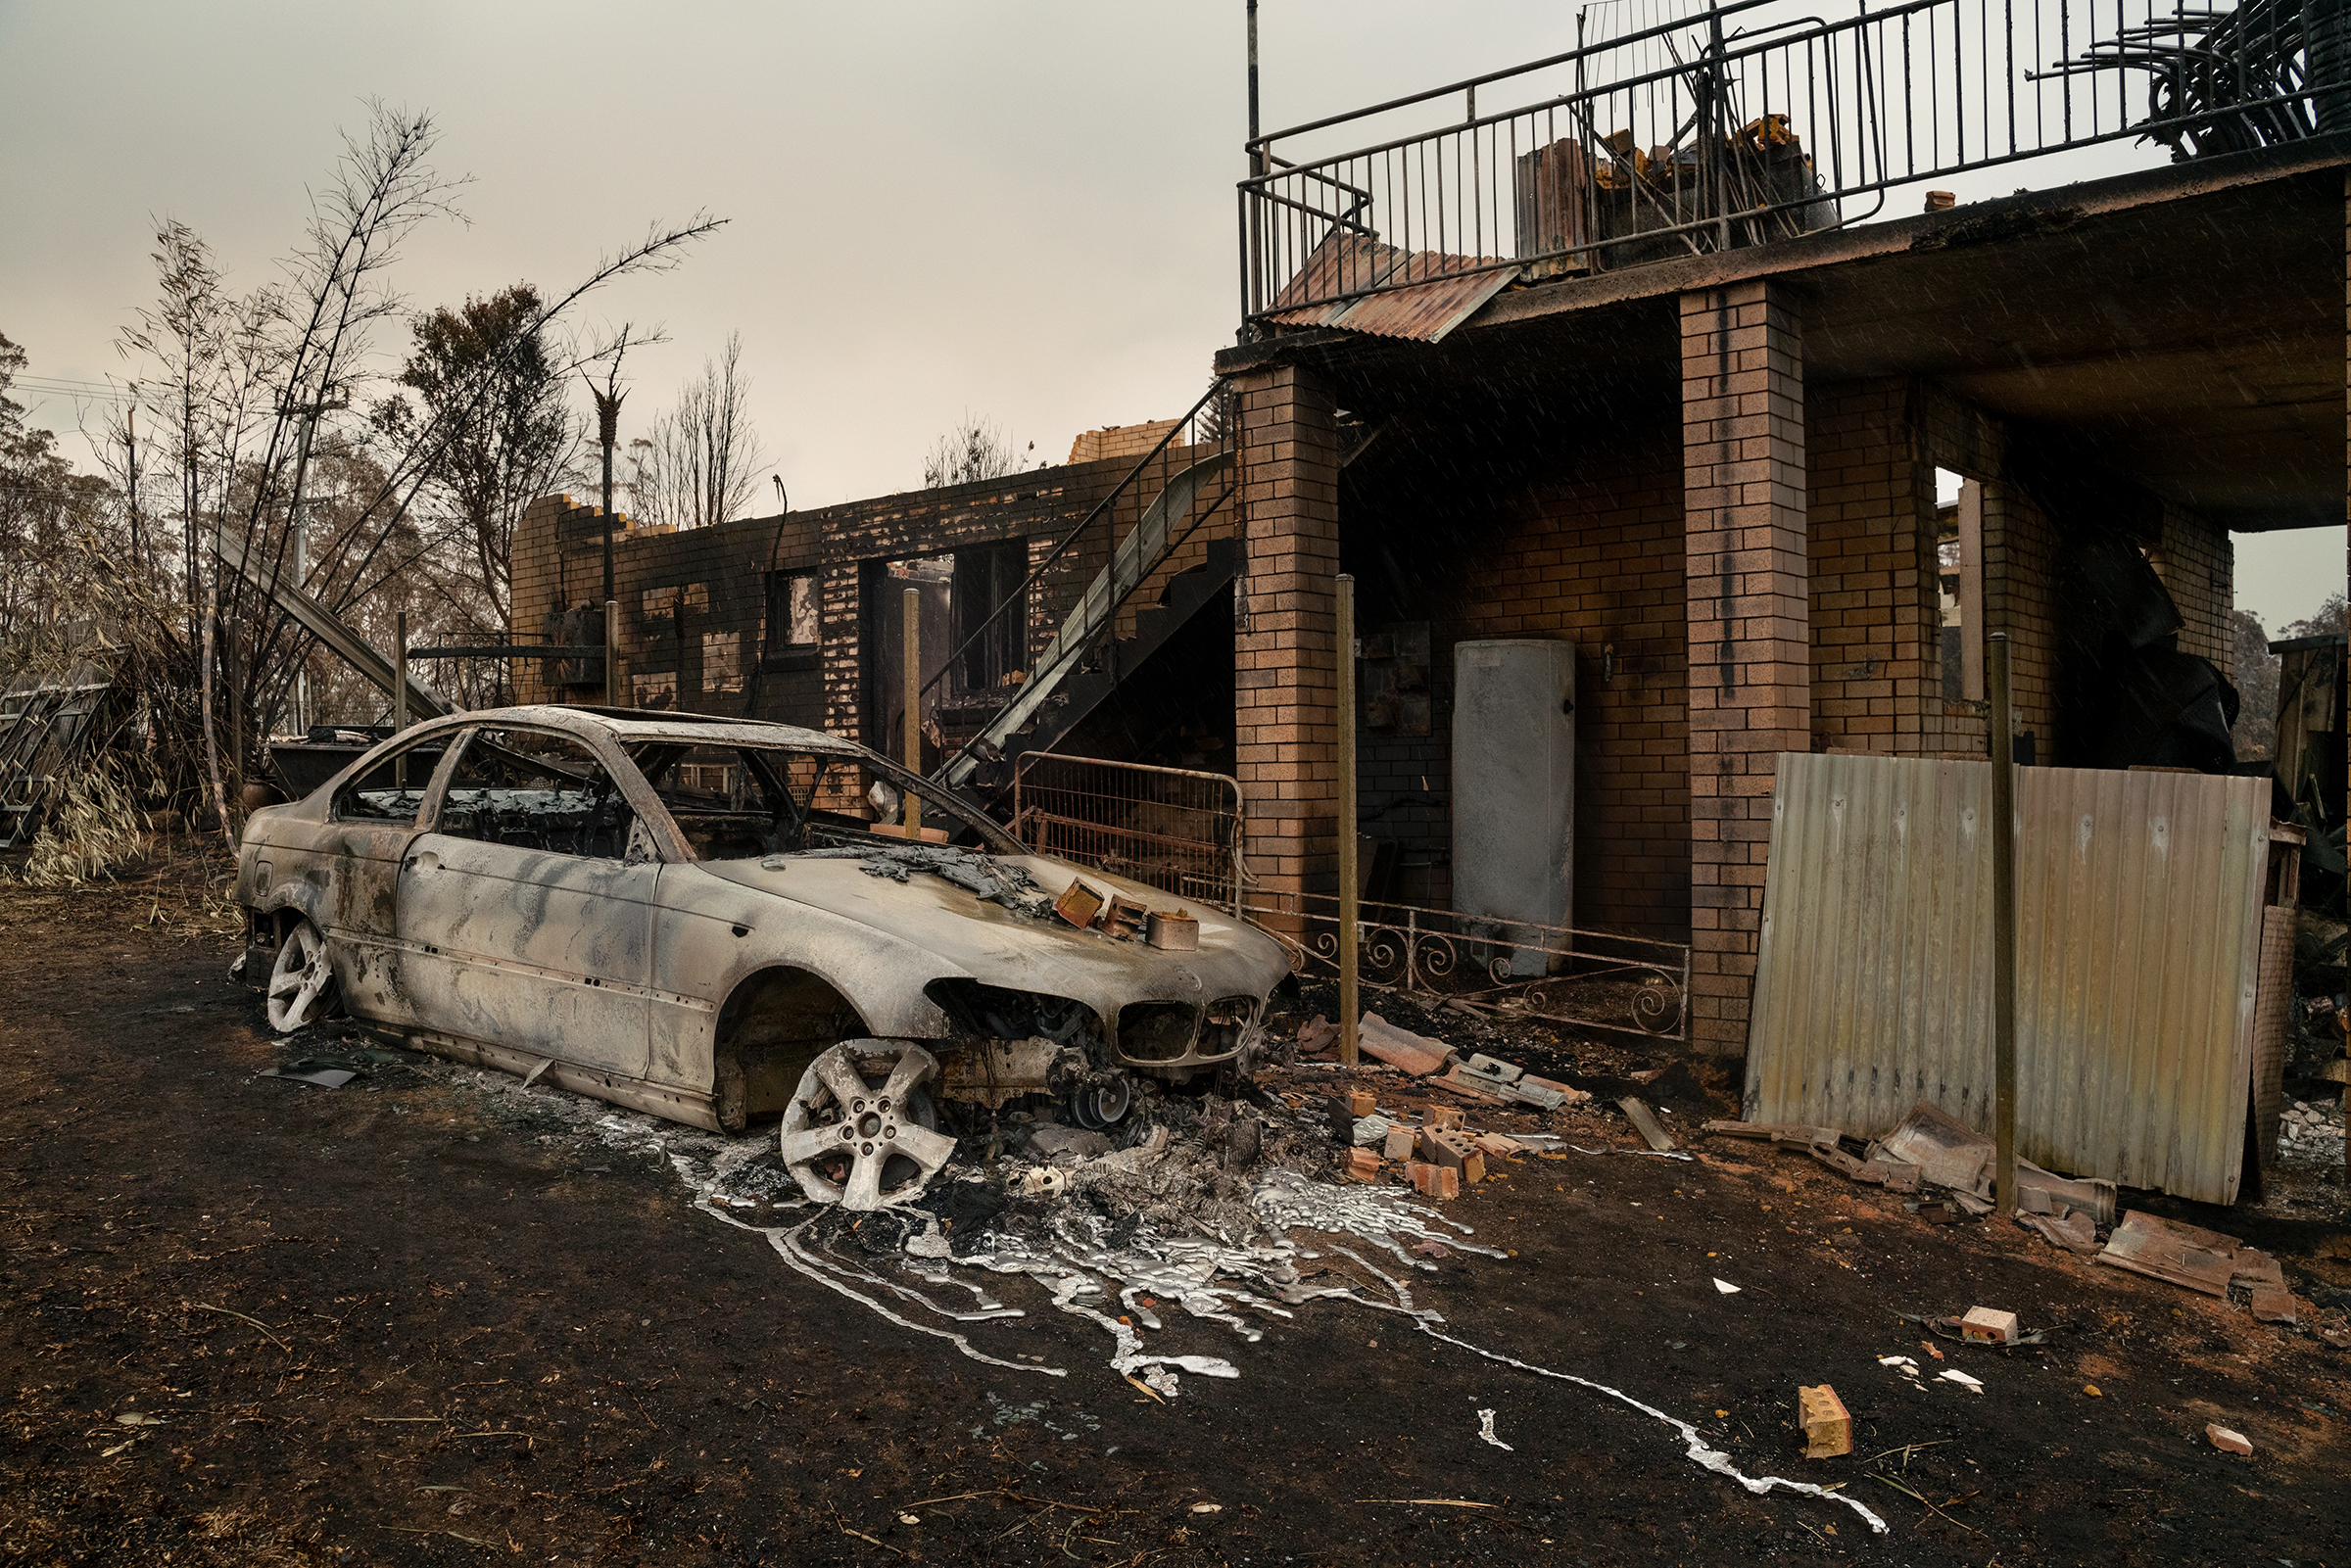 A damaged property and vehicle in Lake Conjola, New South Wales, on Jan. 5. (Adam Ferguson for TIME)